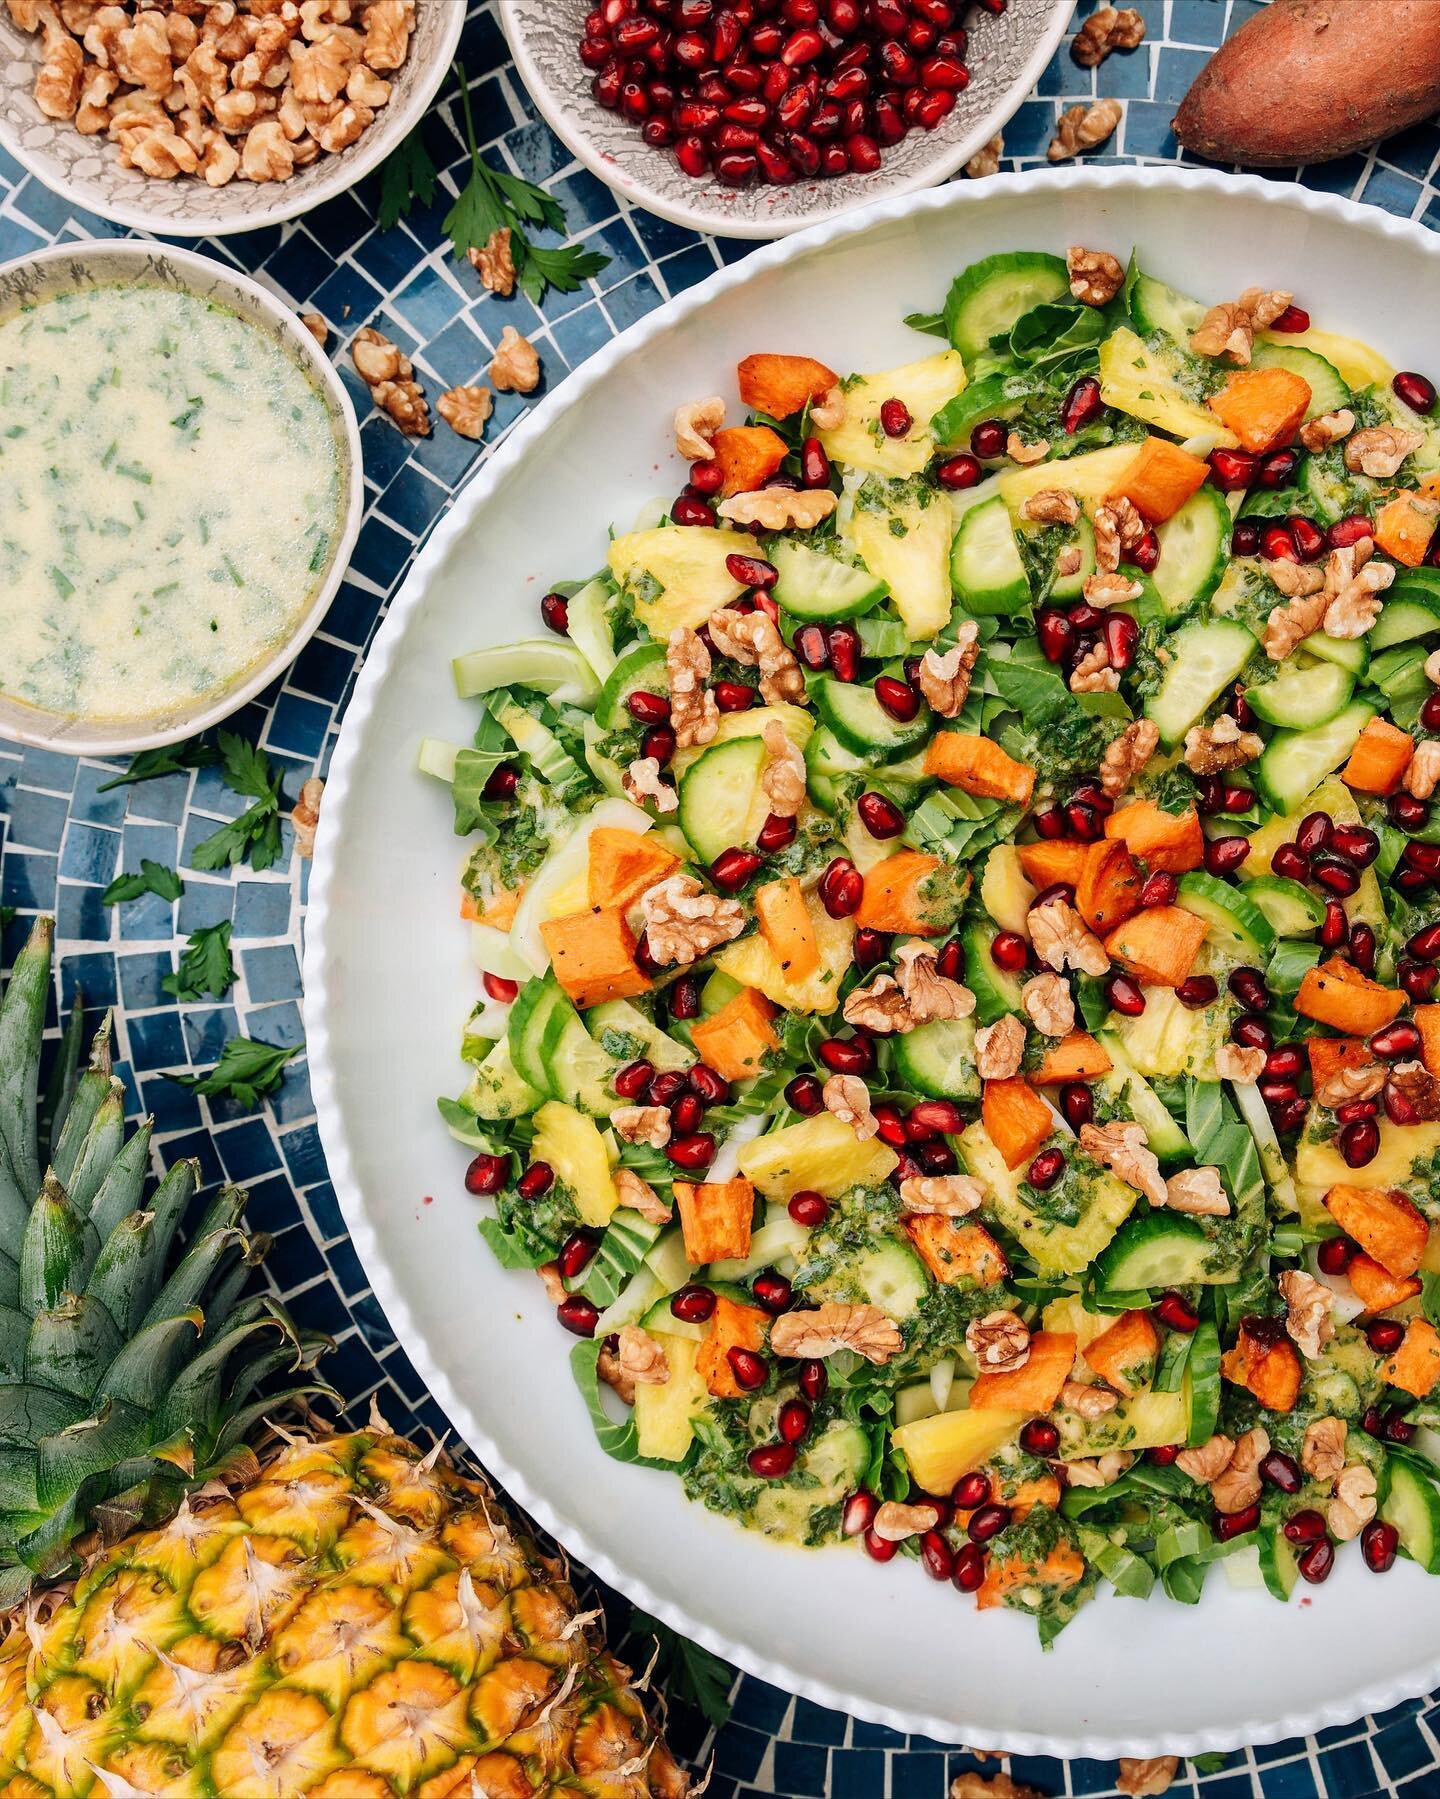 ⭐️Happy 4th of July!⭐️I wanted to share this refreshing summer Pineapple Bok Choy Salad that would be a delicious salad option for a 4th of July bbq, or just to enjoy on any warm summer day 🌞 This recipe is by @revive_with_rivkah , photo by me @aria